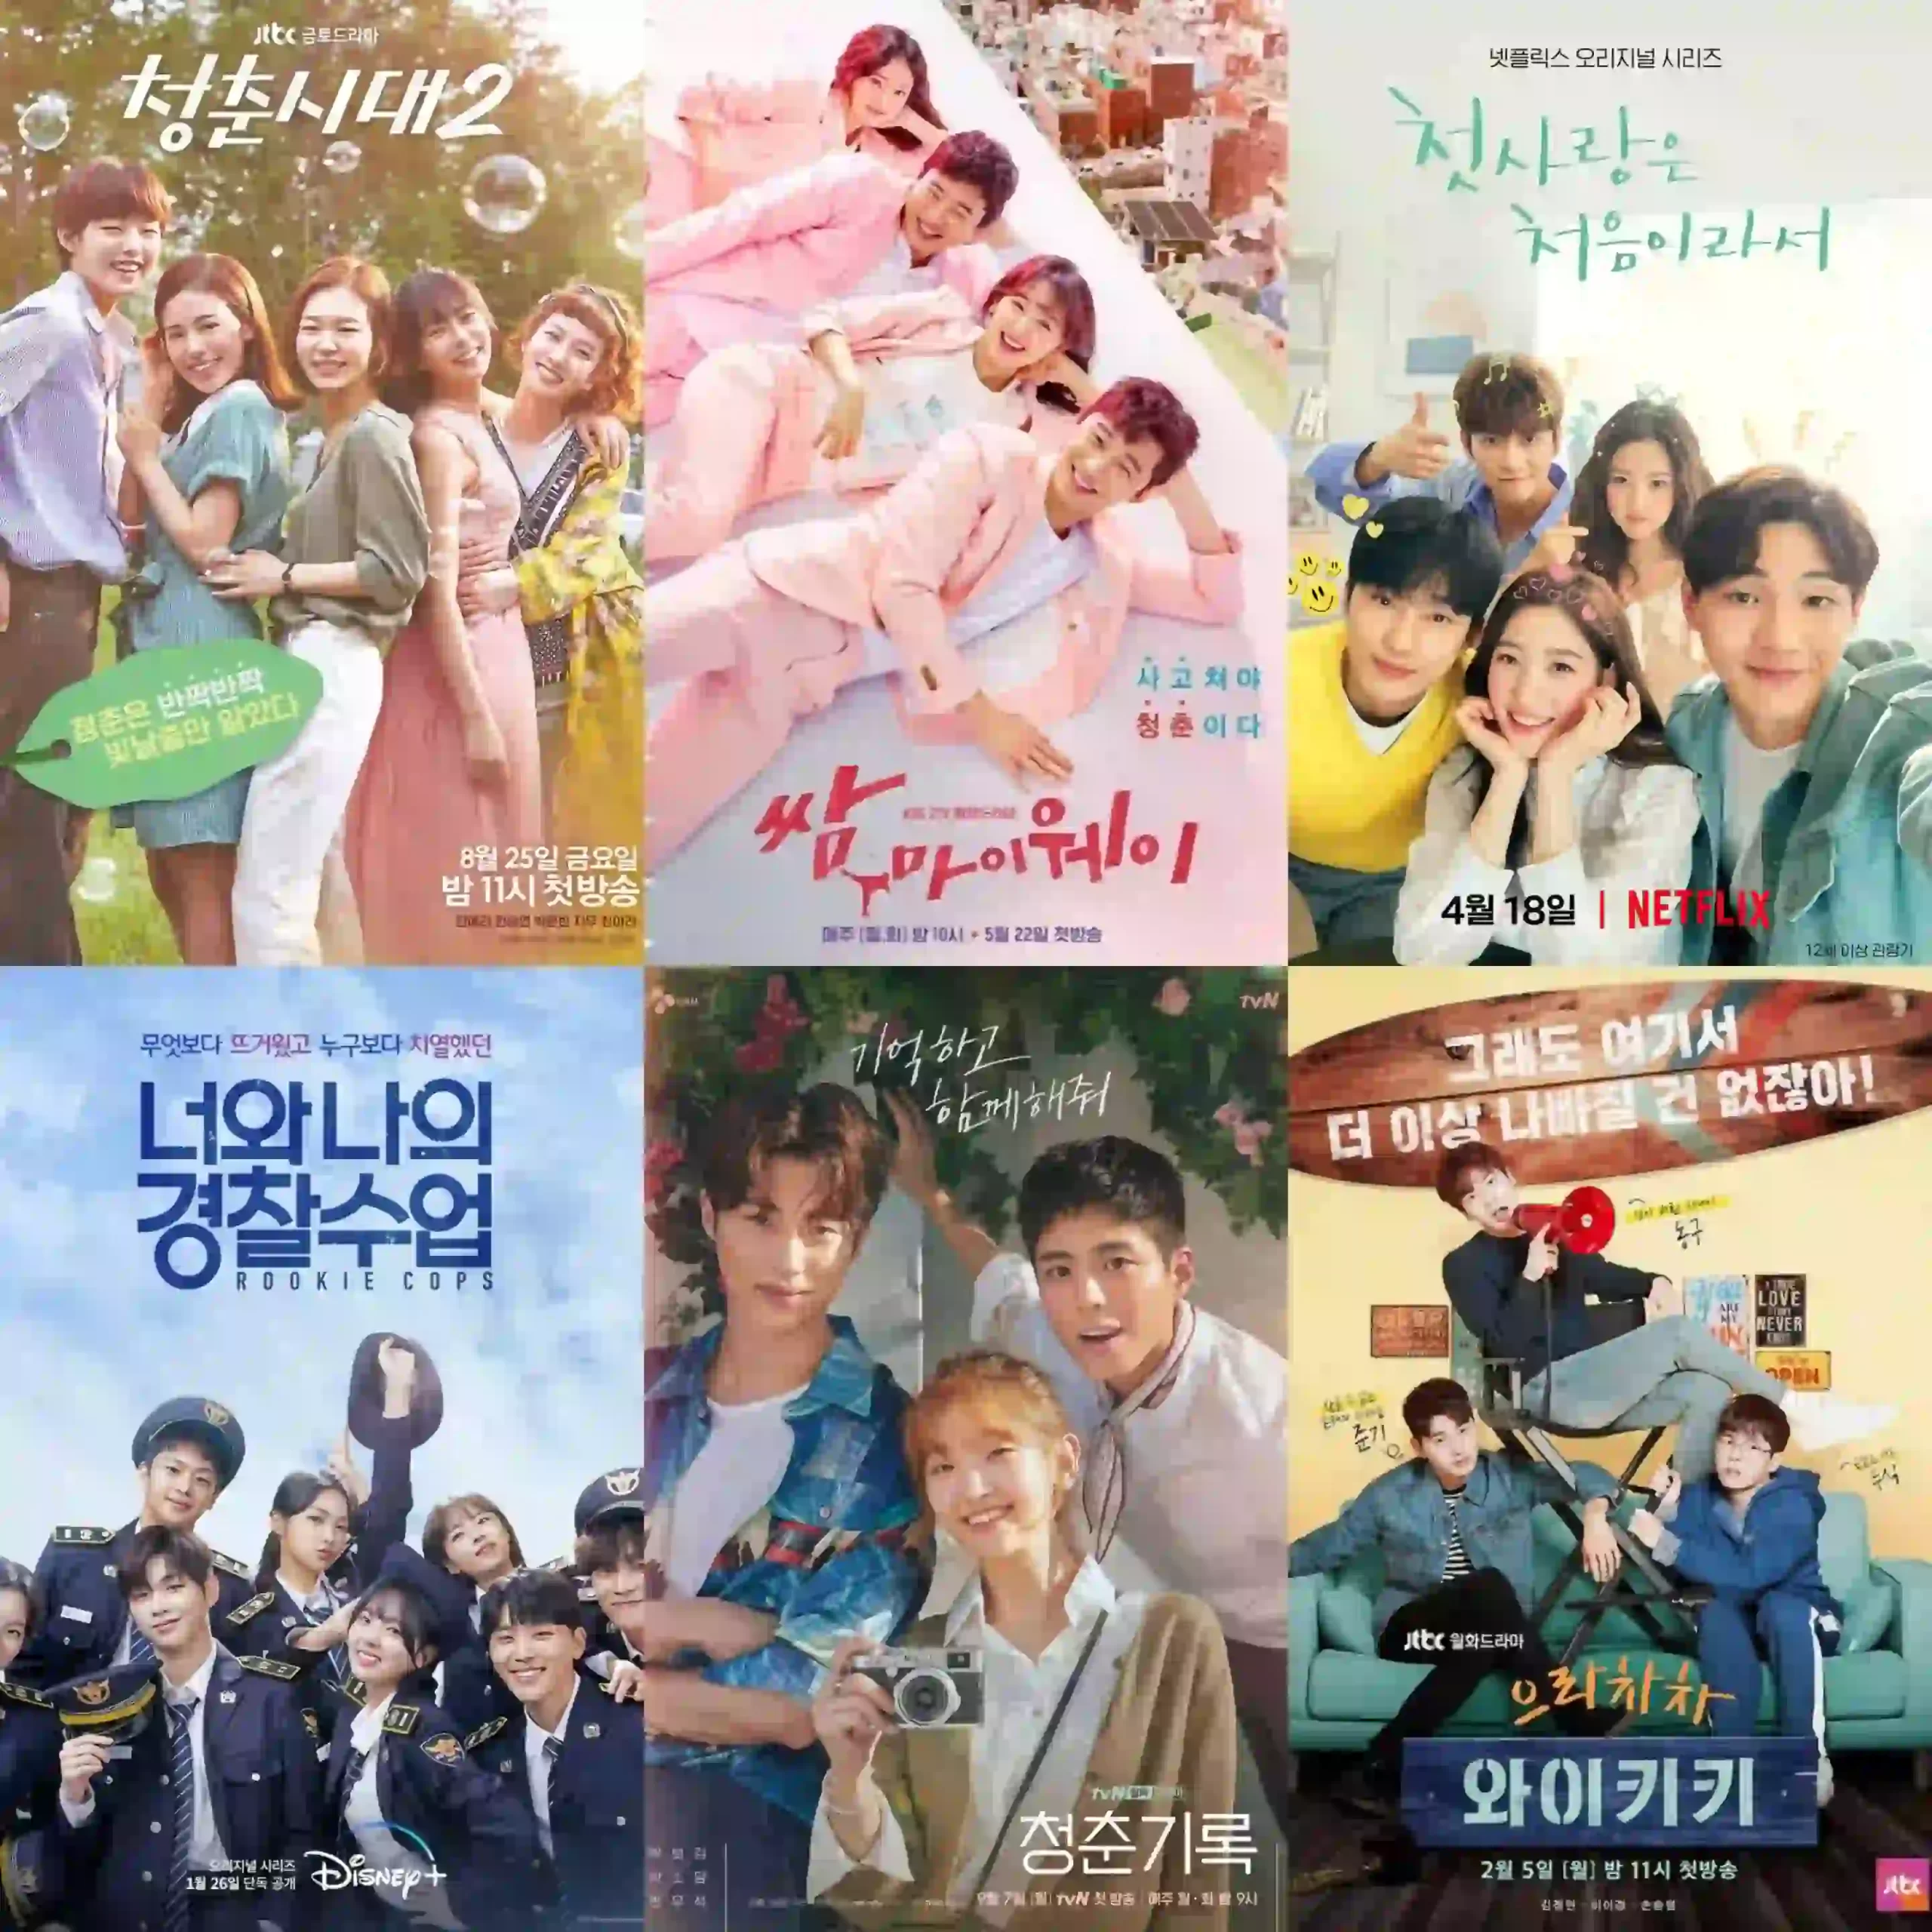 Best coming of age Korean drama to watch